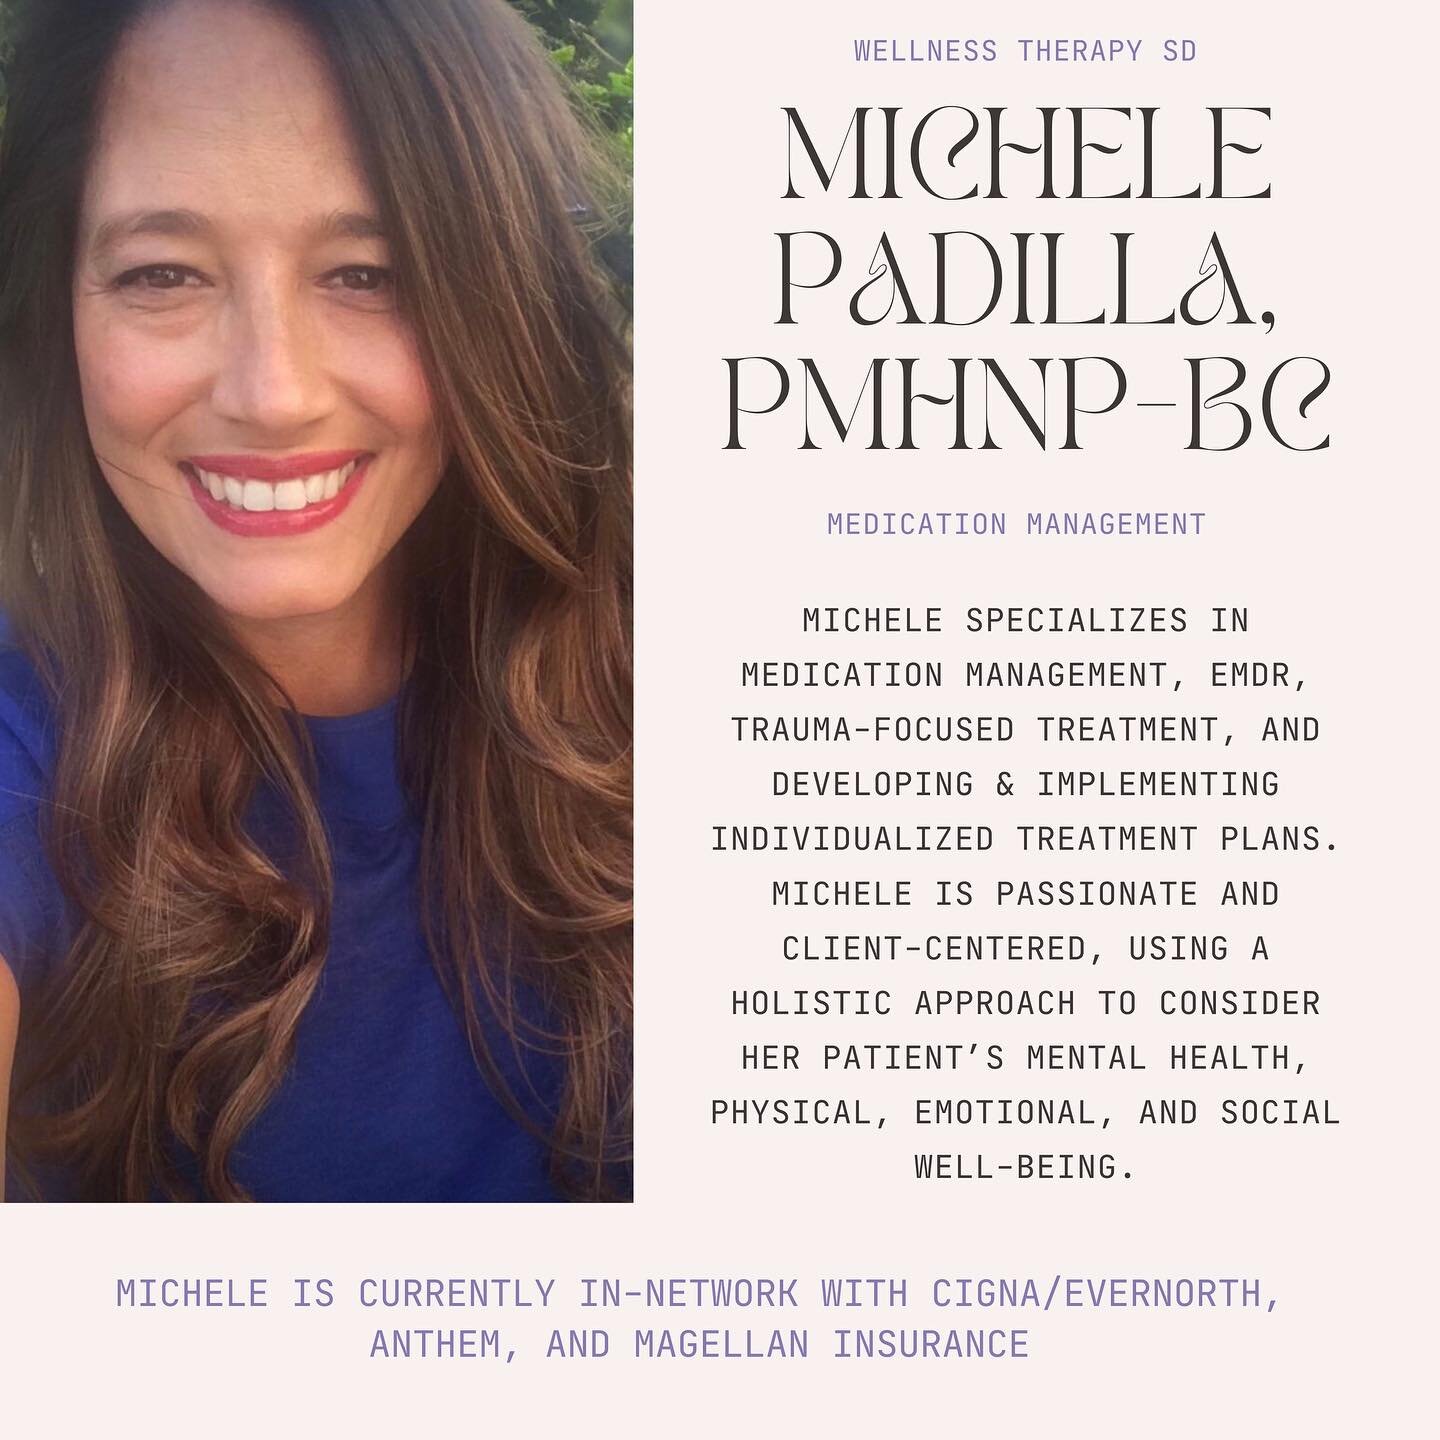 Highlighting our amazing Nurse Practitioner- Michele Padilla!
Michele Padilla, PMHNP-BC, is currently accepting new clients! Click the link in our bio to schedule an appointment! 

#wellness #sandiego #sandiegotherapist #mentalhealth #psychology #min